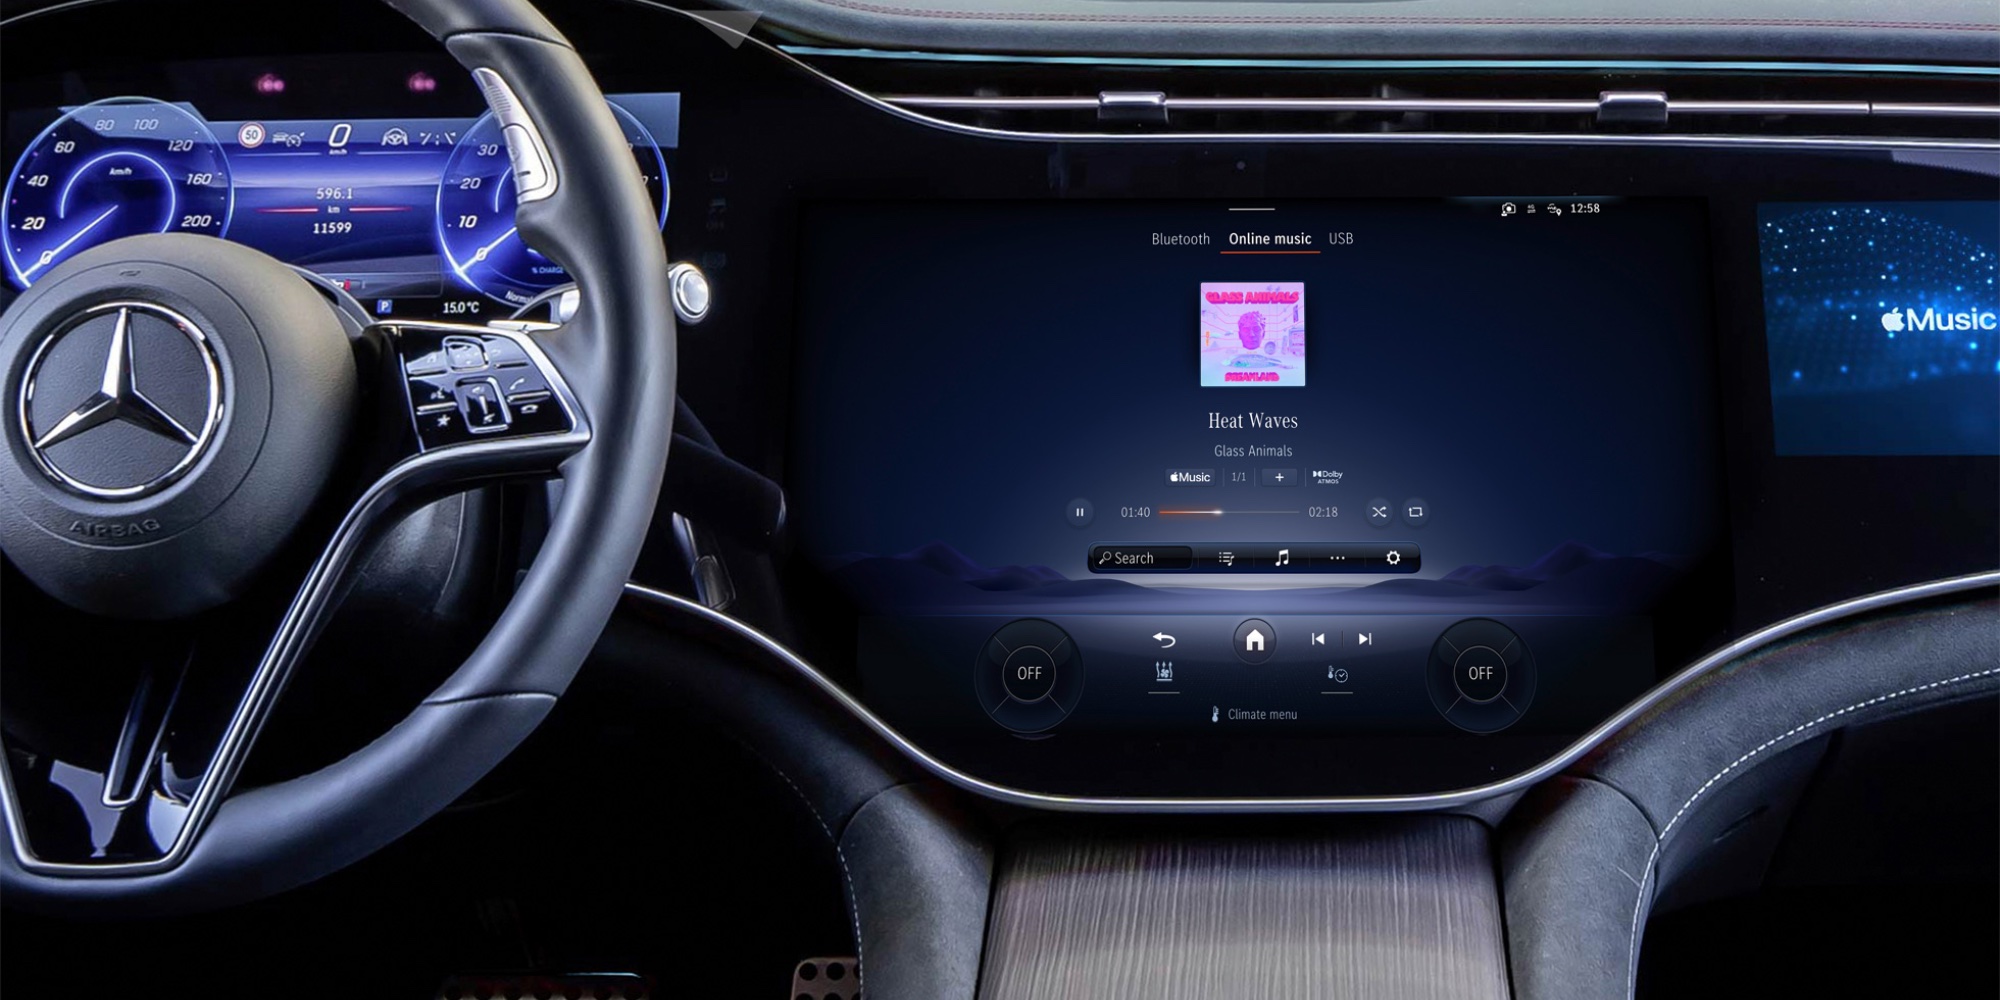 Apple Music Spatial Audio feature expands to cars with MercedesBenz